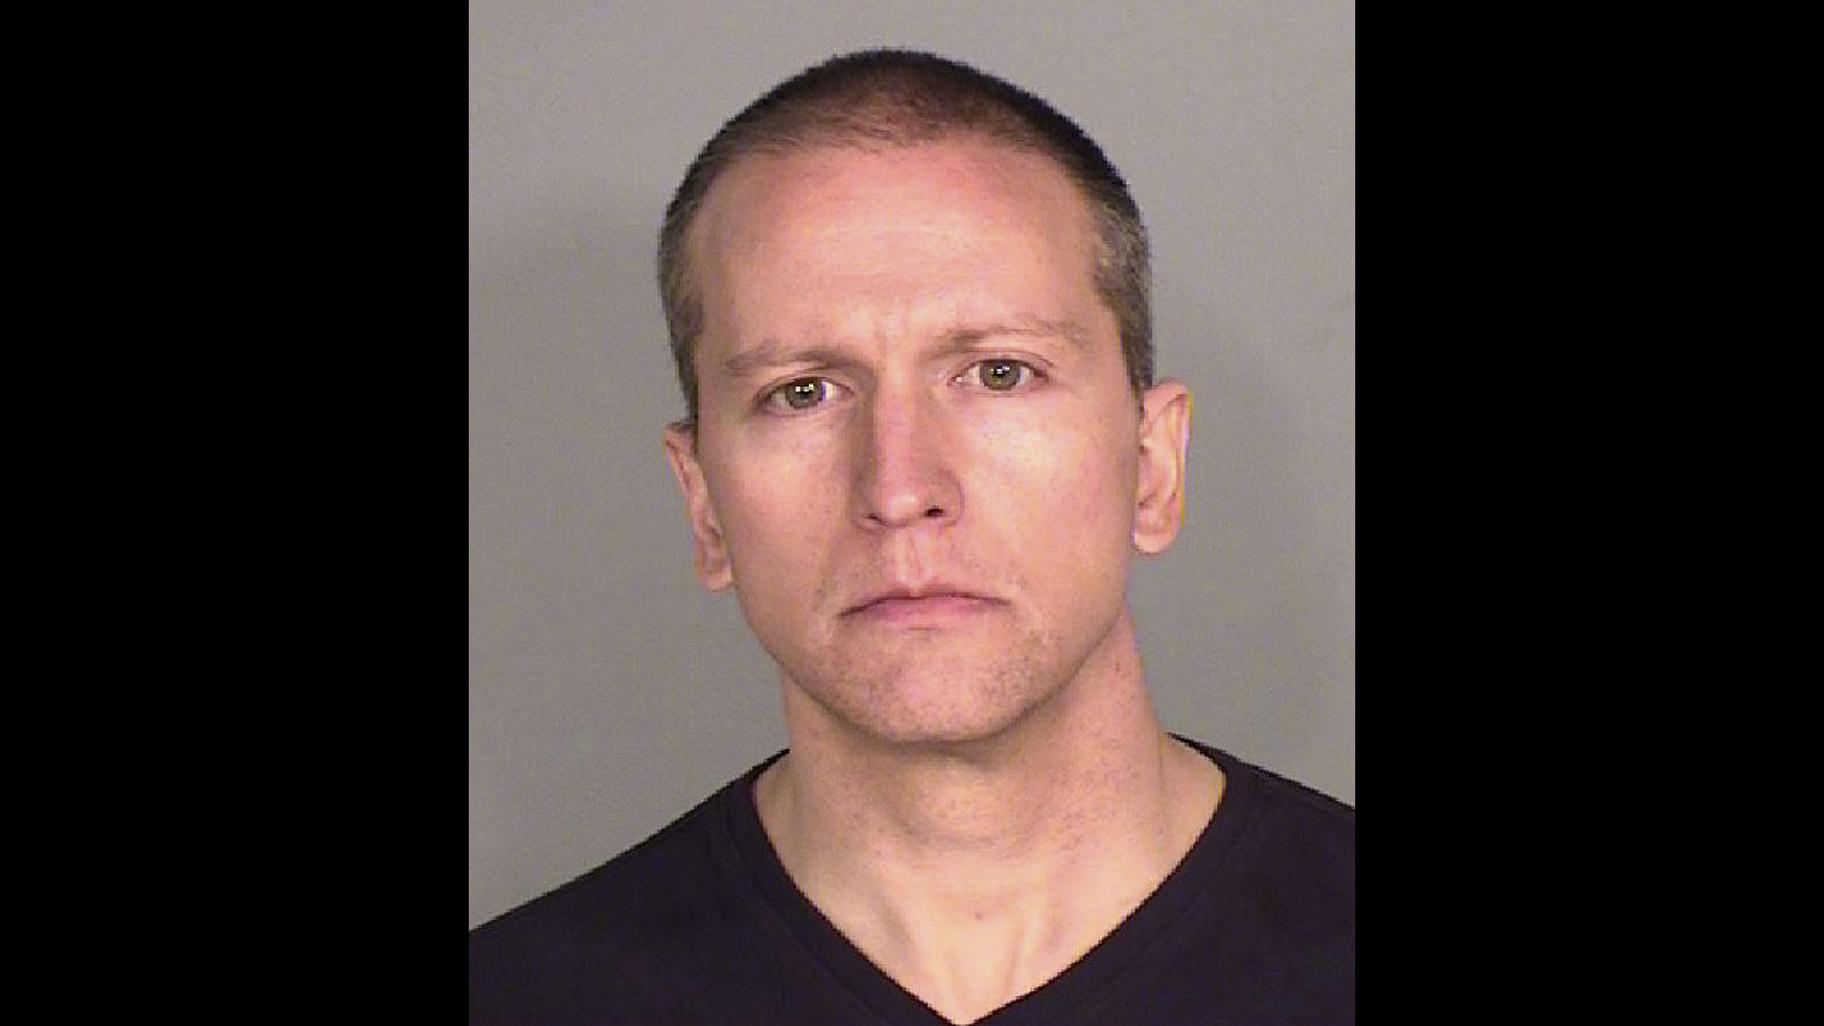 This file photo provided by the Ramsey County, Minn., Sheriff’s Office shows former Minneapolis police Officer Derek Chauvin, who was arrested Friday, May 29, 2020, in the Memorial Day death of George Floyd. (Ramsey County Sheriff’s Office via AP, File)